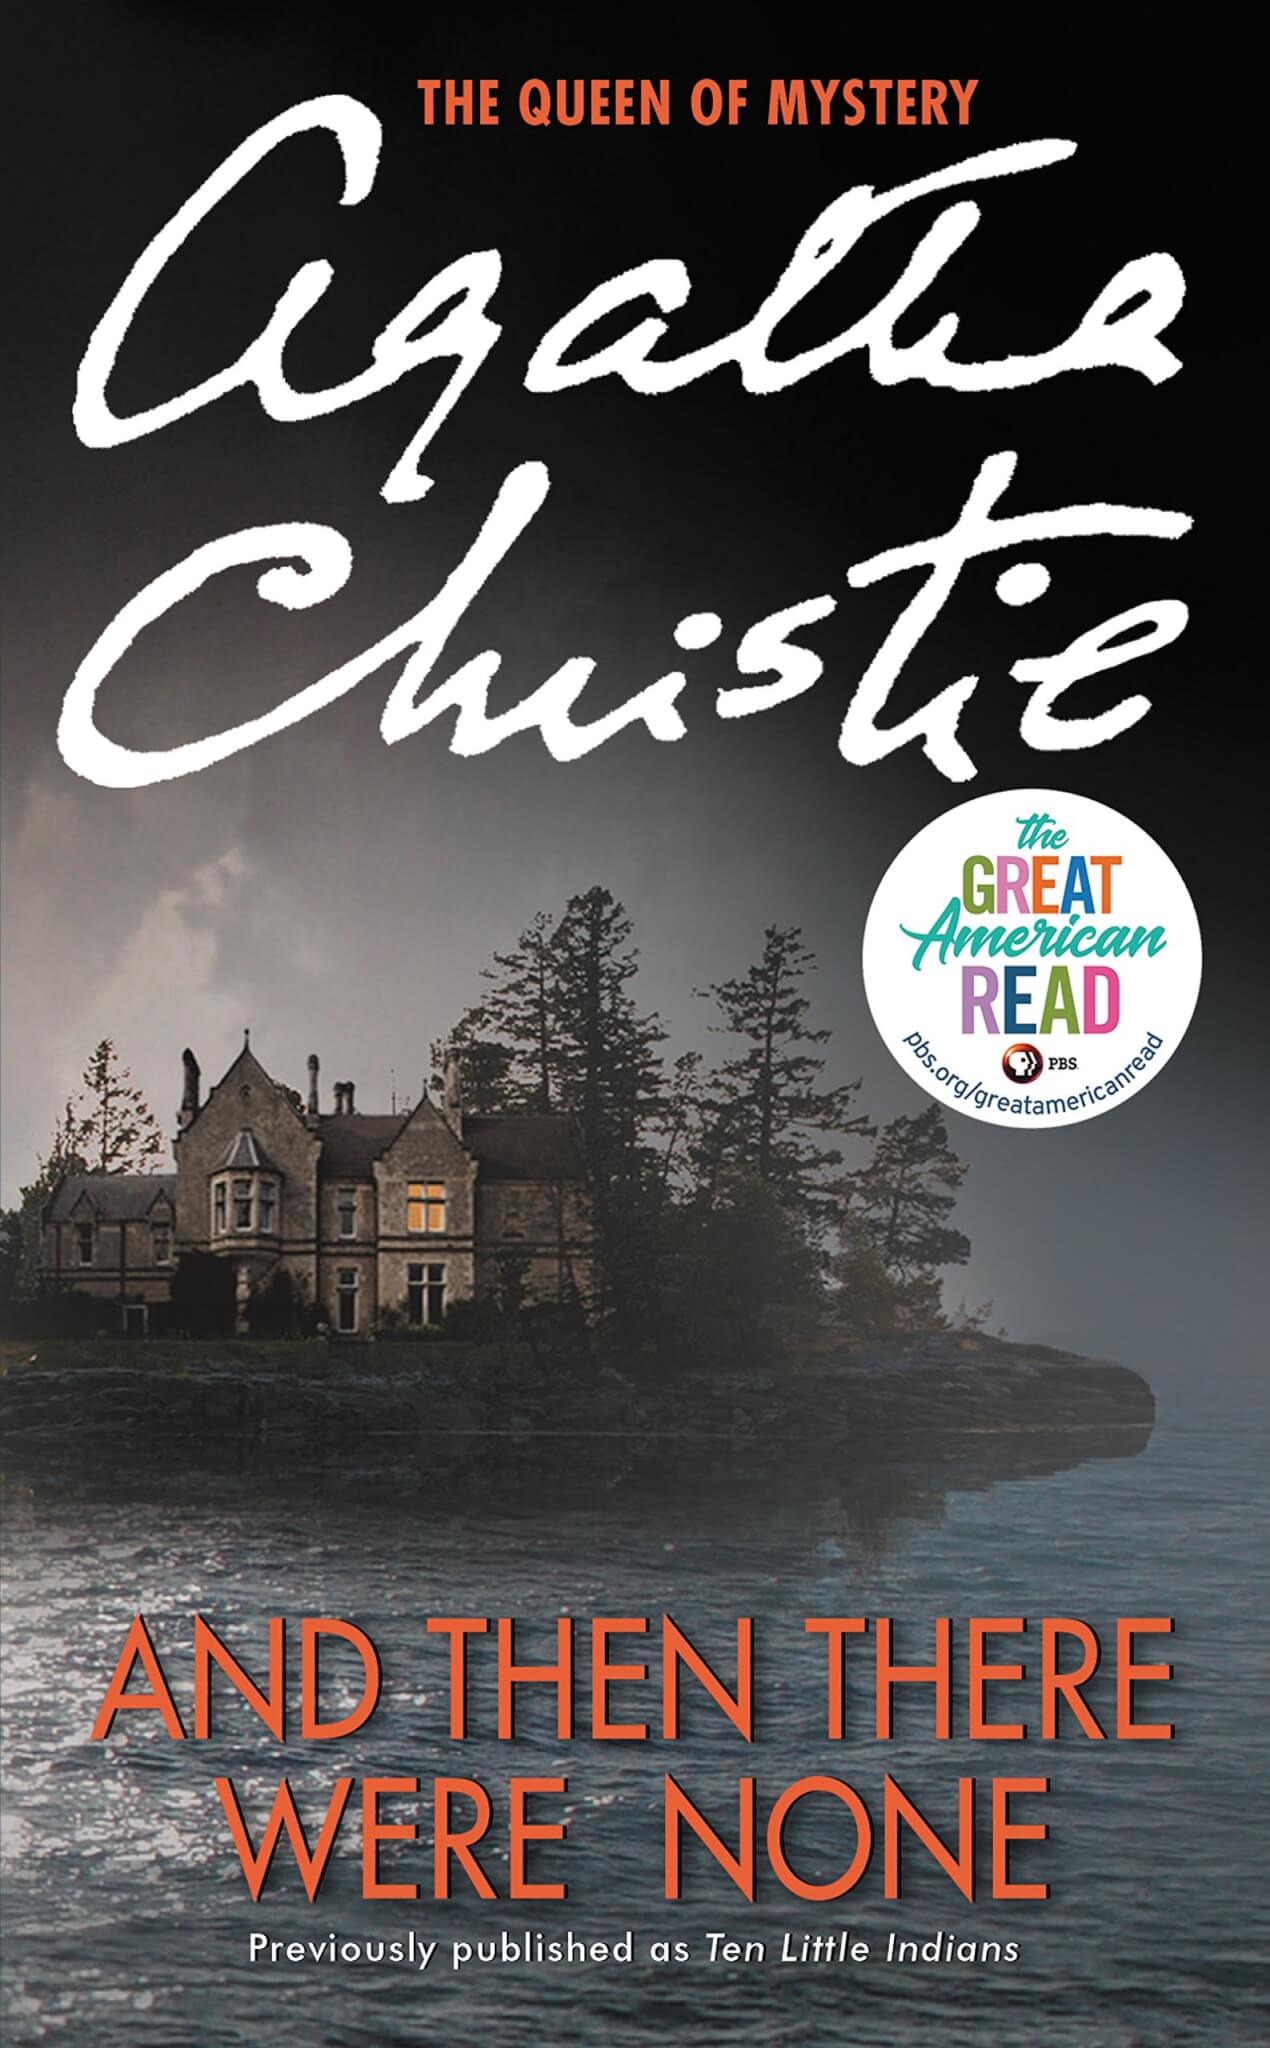 "And then There Were None" by Agatha Christie